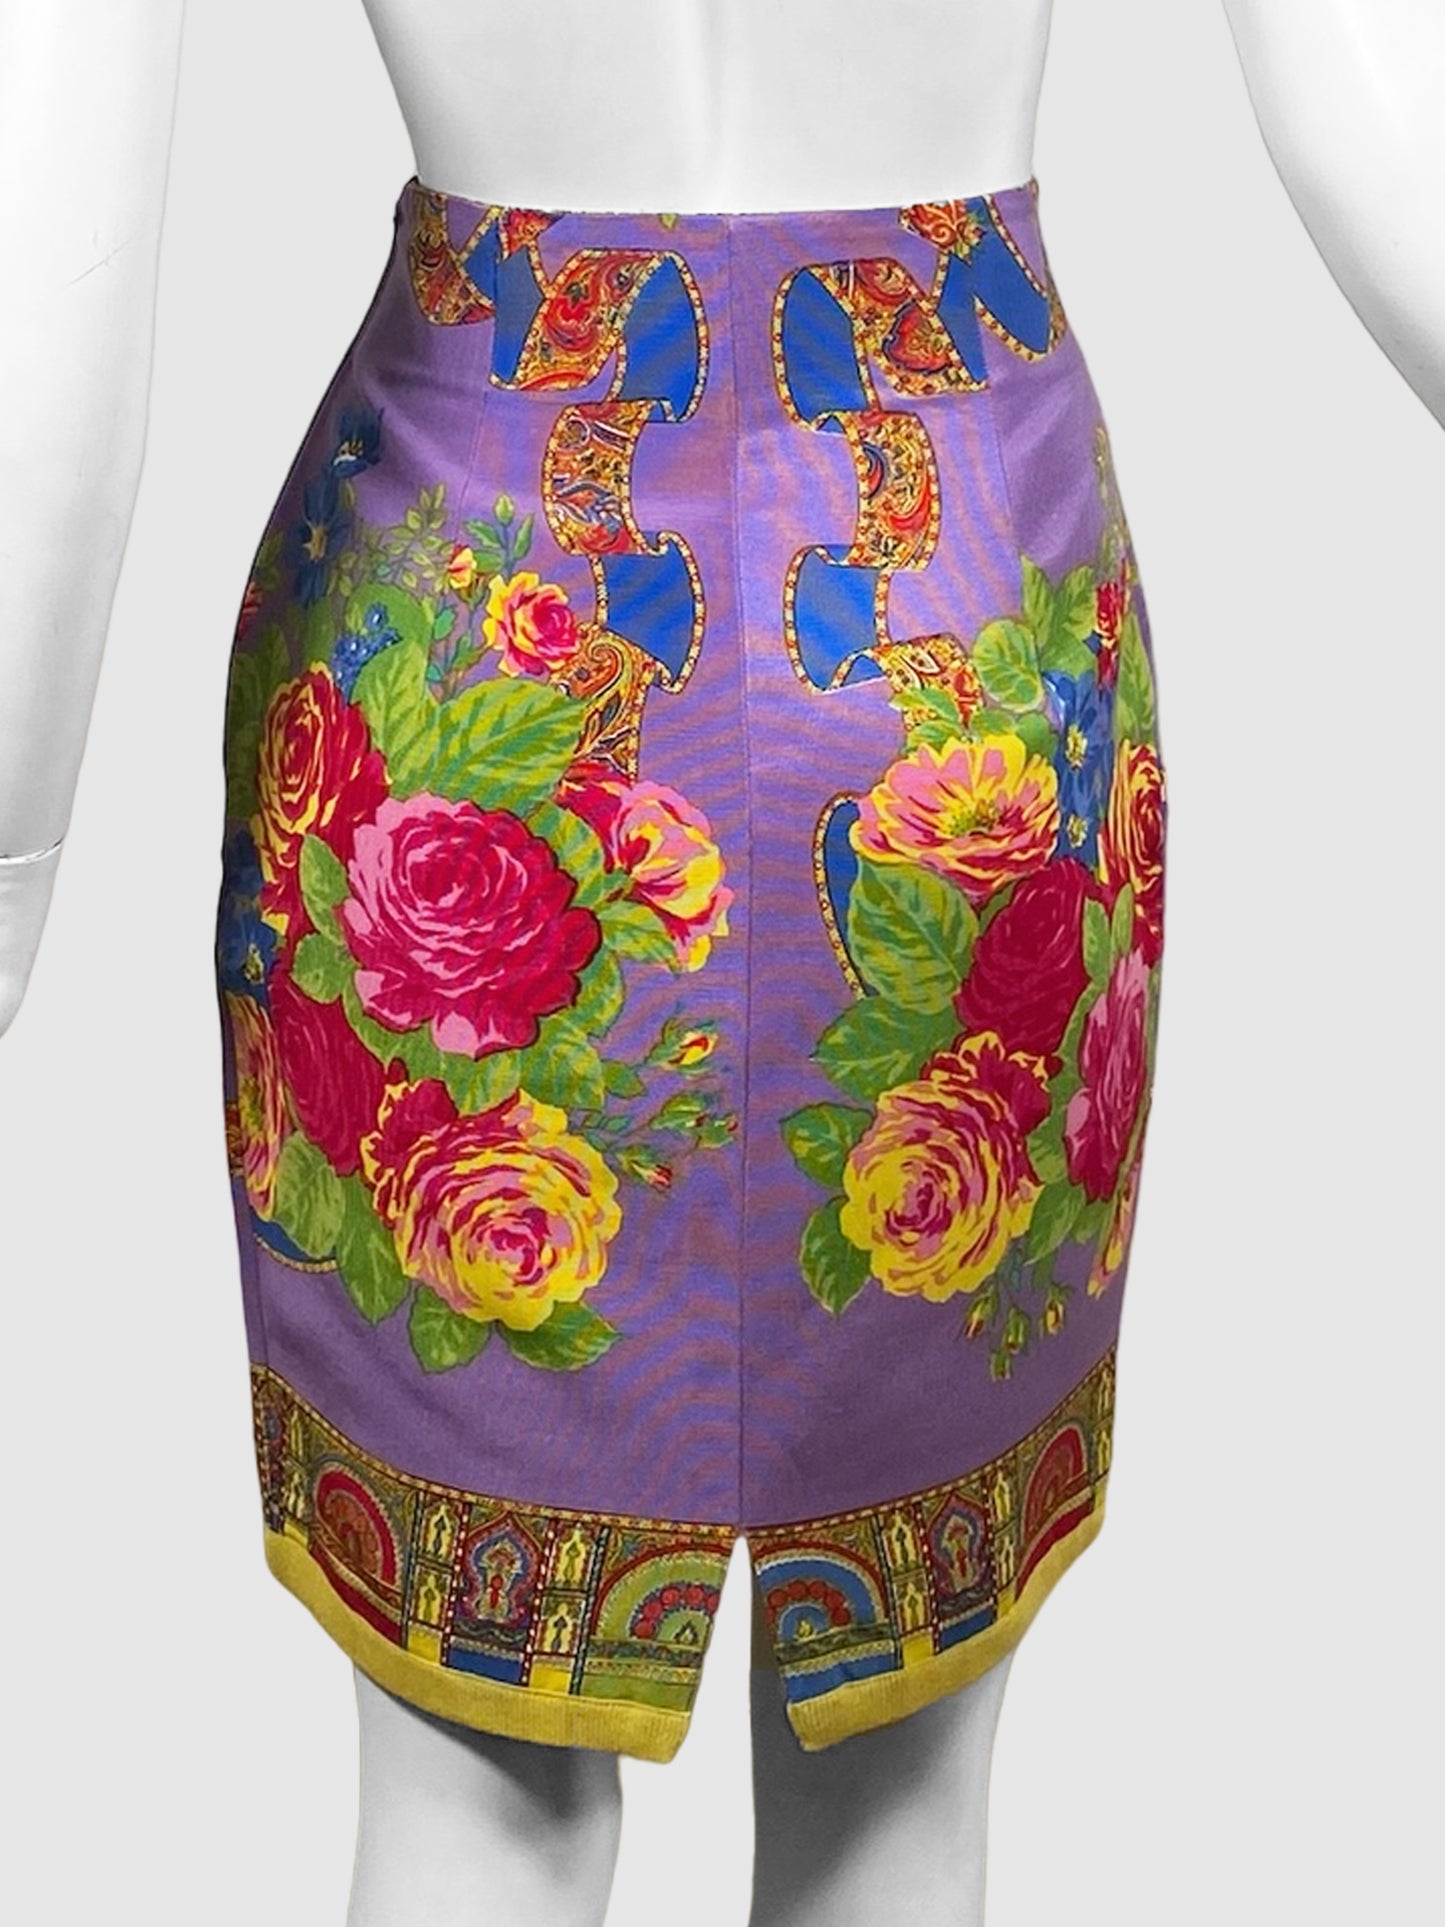 Gianni Versace Floral Two Piece Set - Size 42